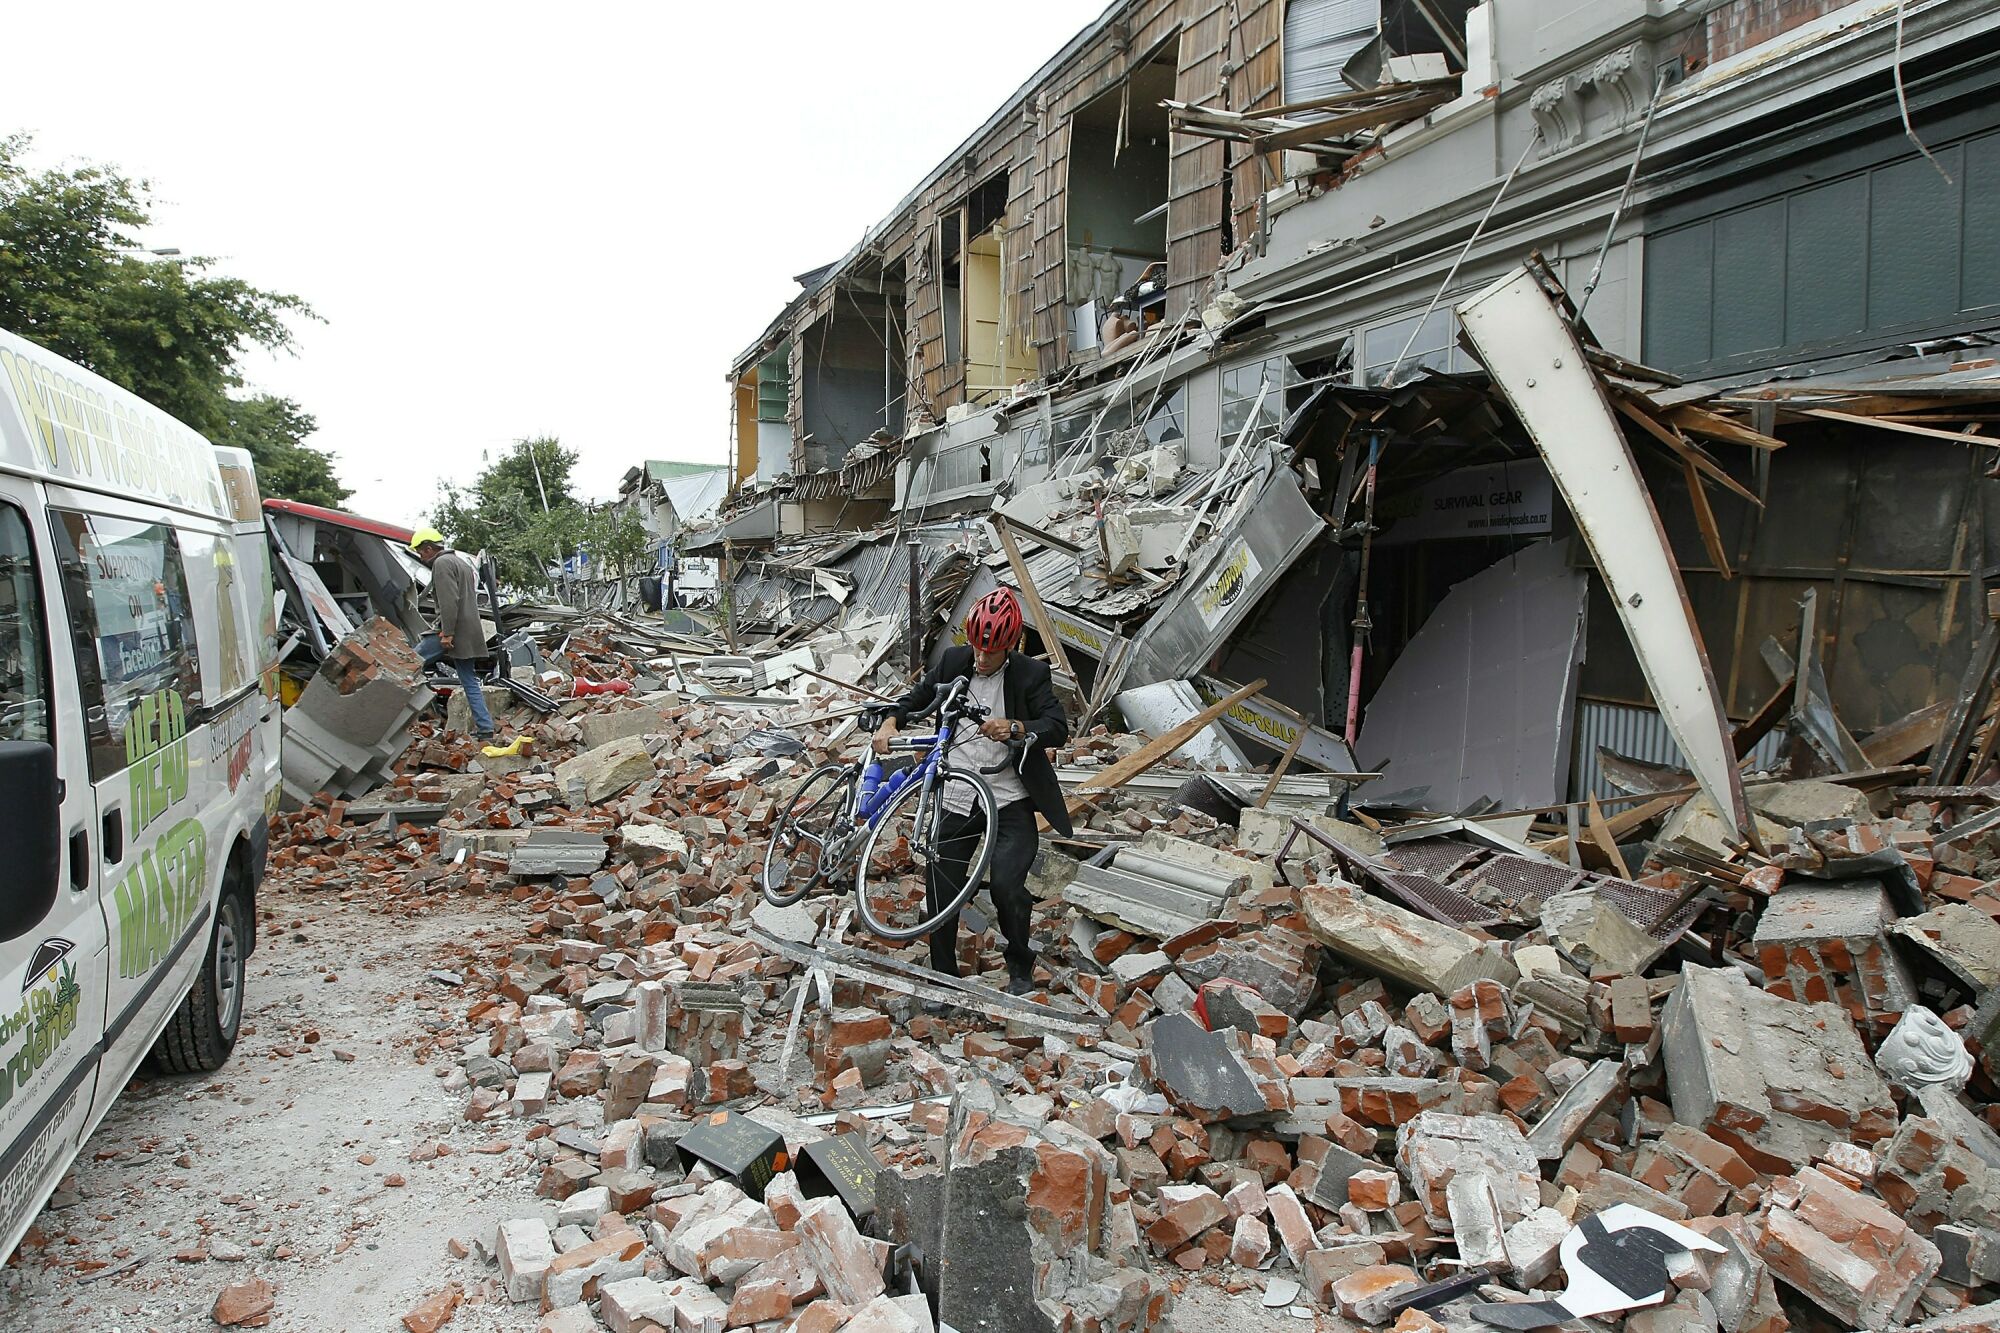 A man retrieves his bike from the remains of a building in Christchurch in 2011.